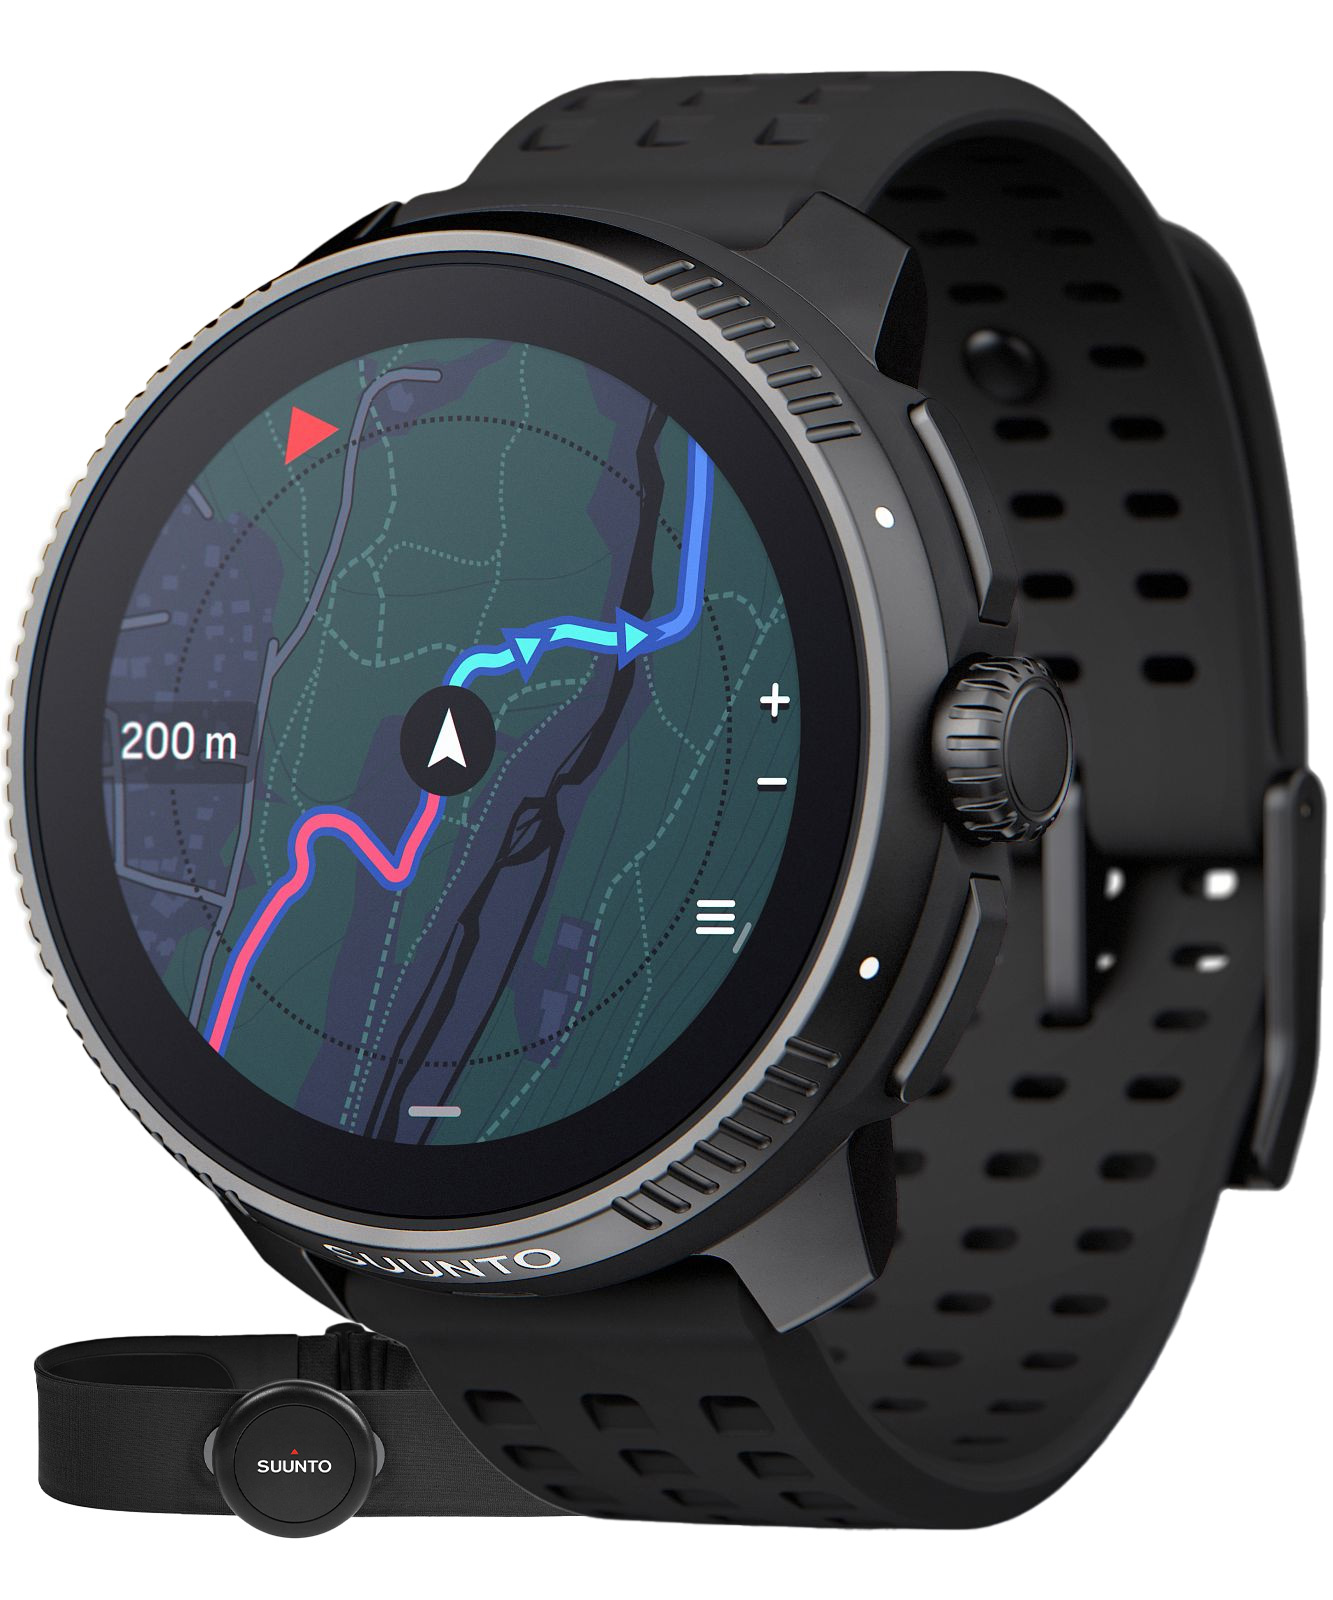 COROS PACE 3 announced with better GPS - Android Authority